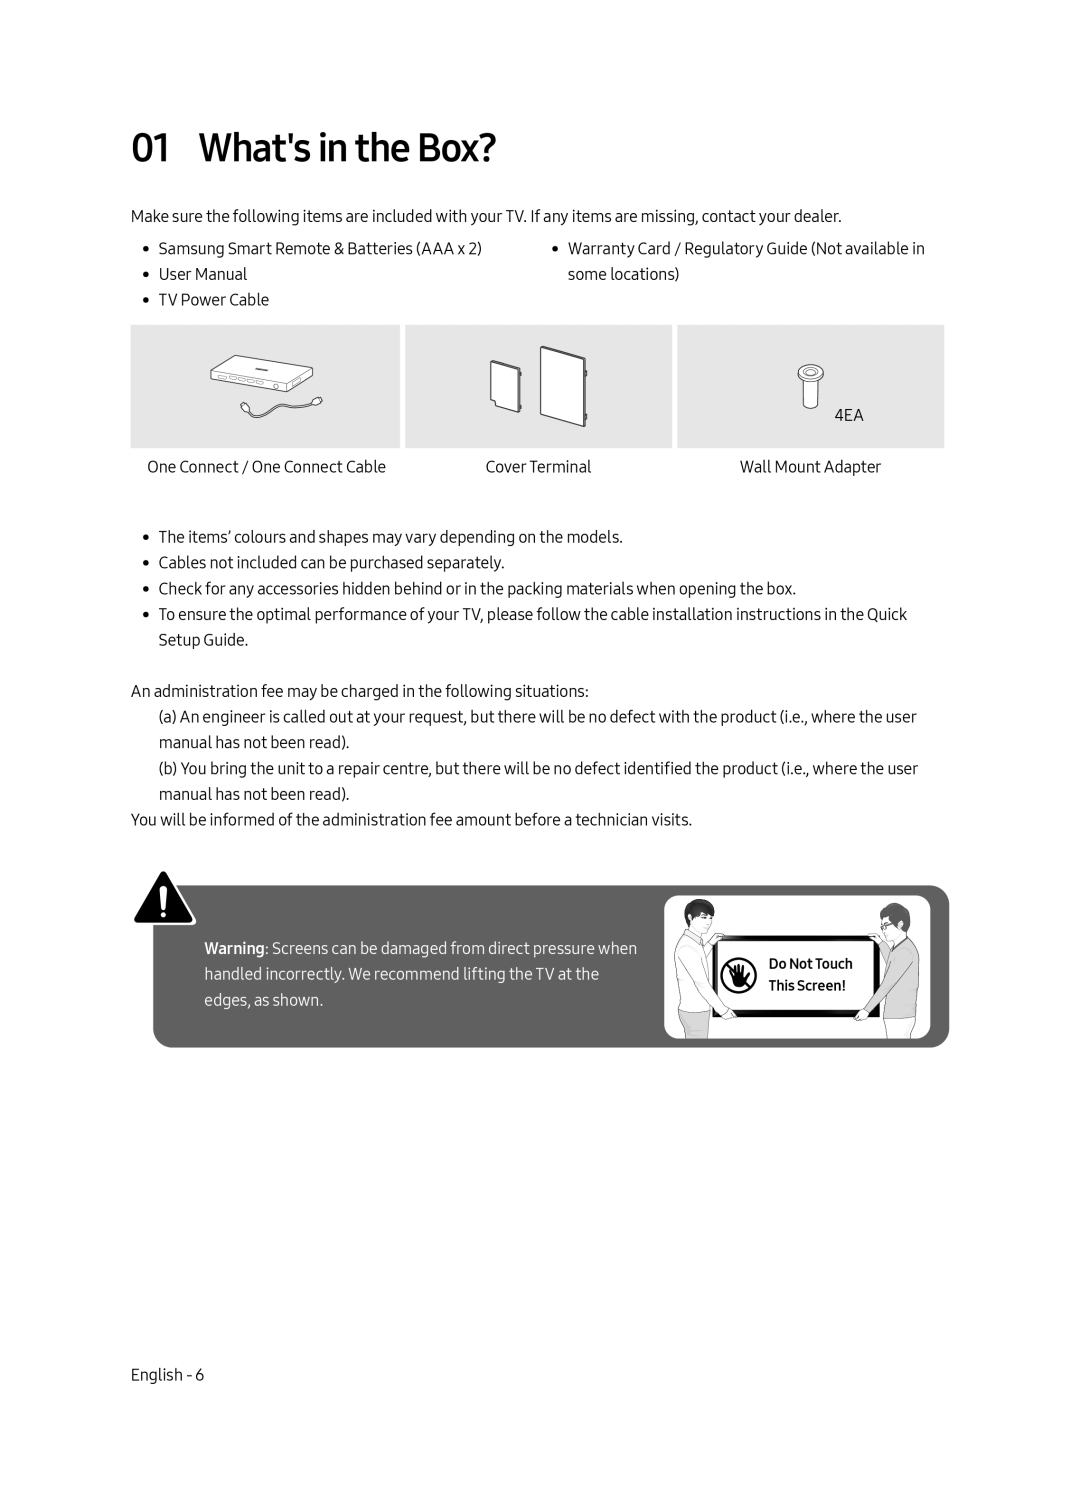 Samsung UE55MU7079TXZG manual Whats in the Box?, Warning Screens can be damaged from direct pressure when, edges, as shown 